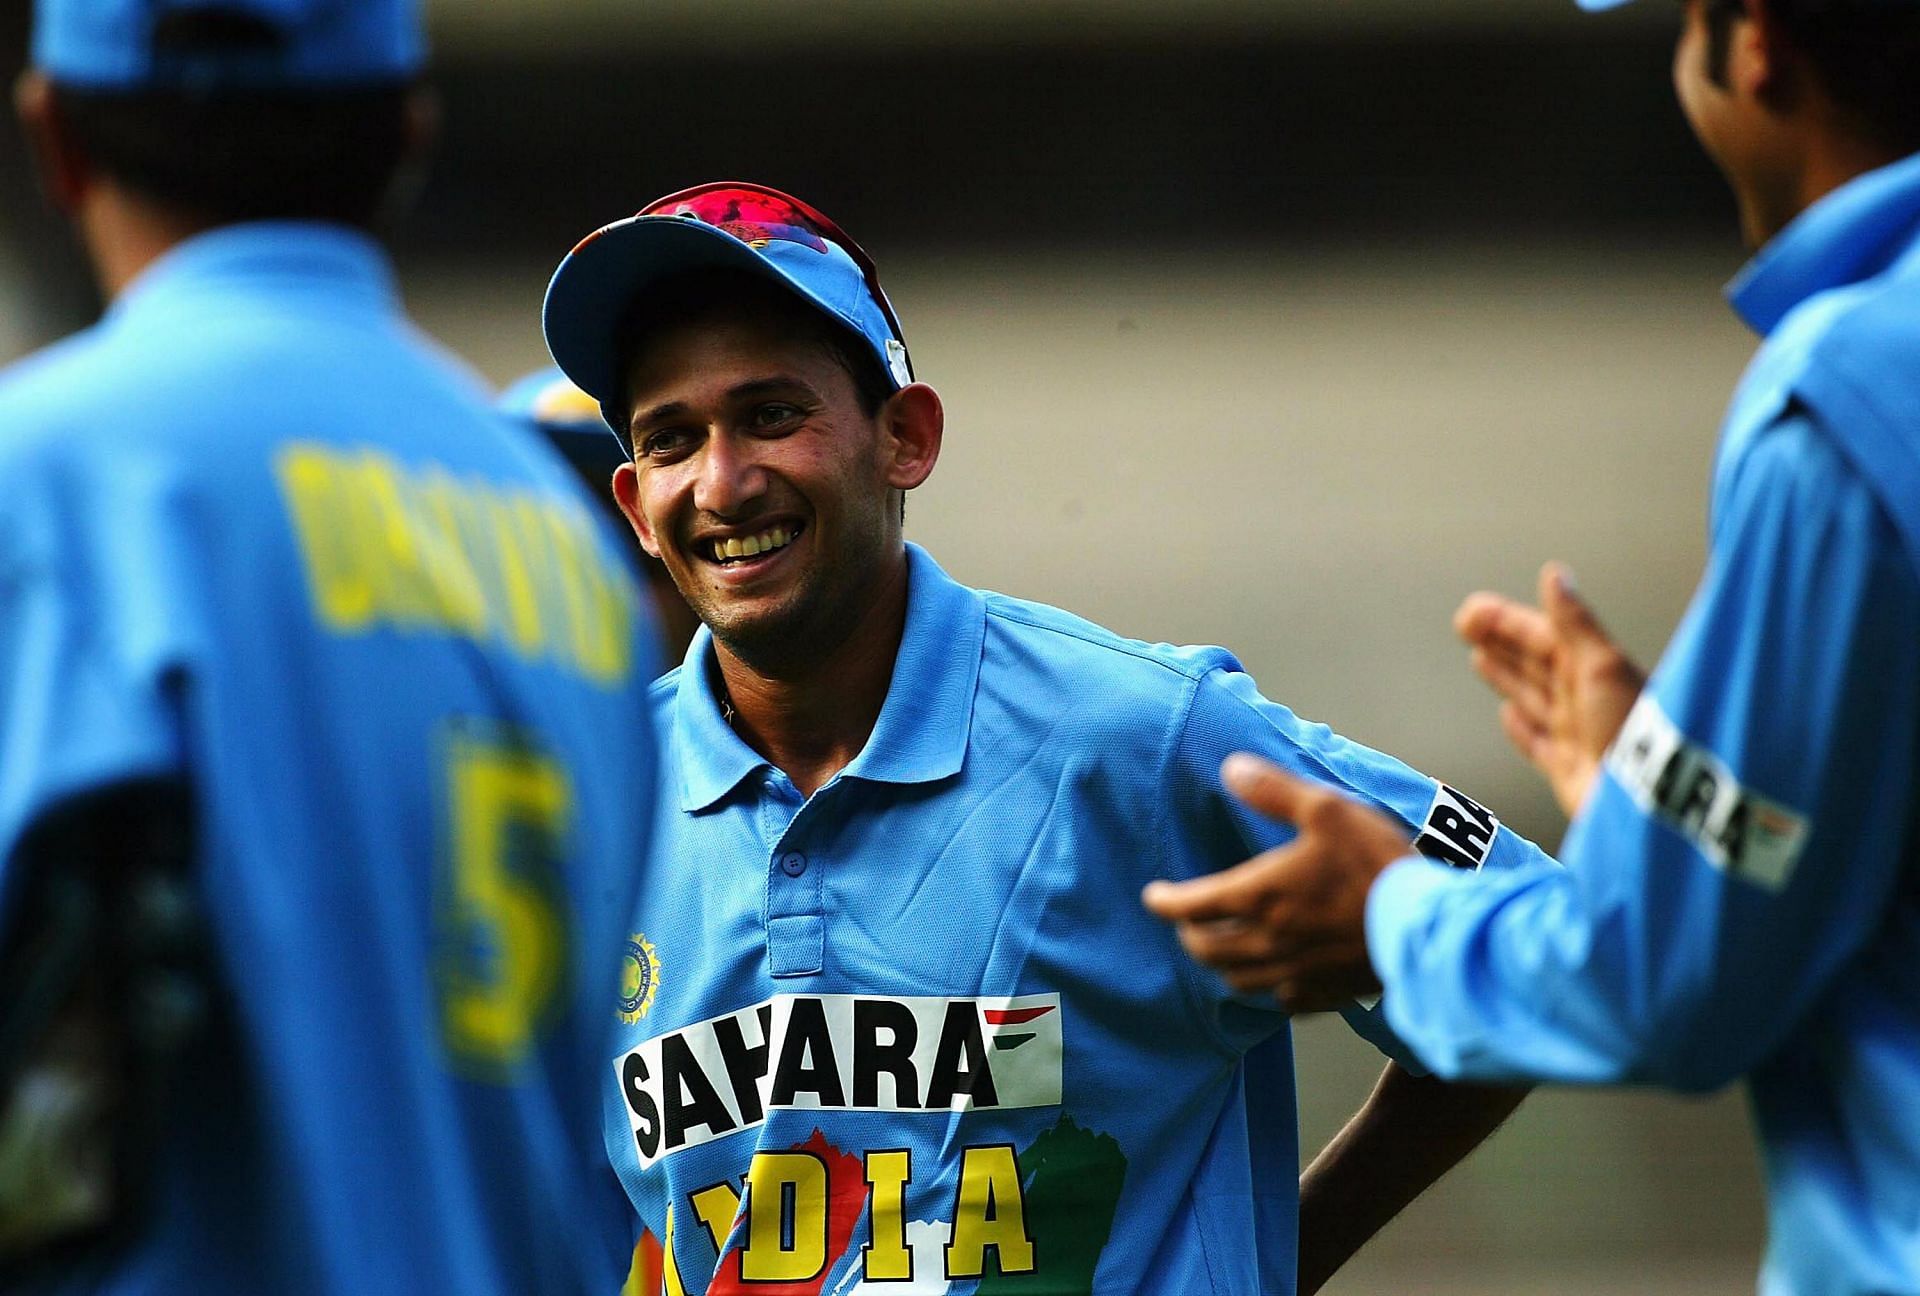 Ajit Agarkar picked up 3 wickets in the first ever IPL game